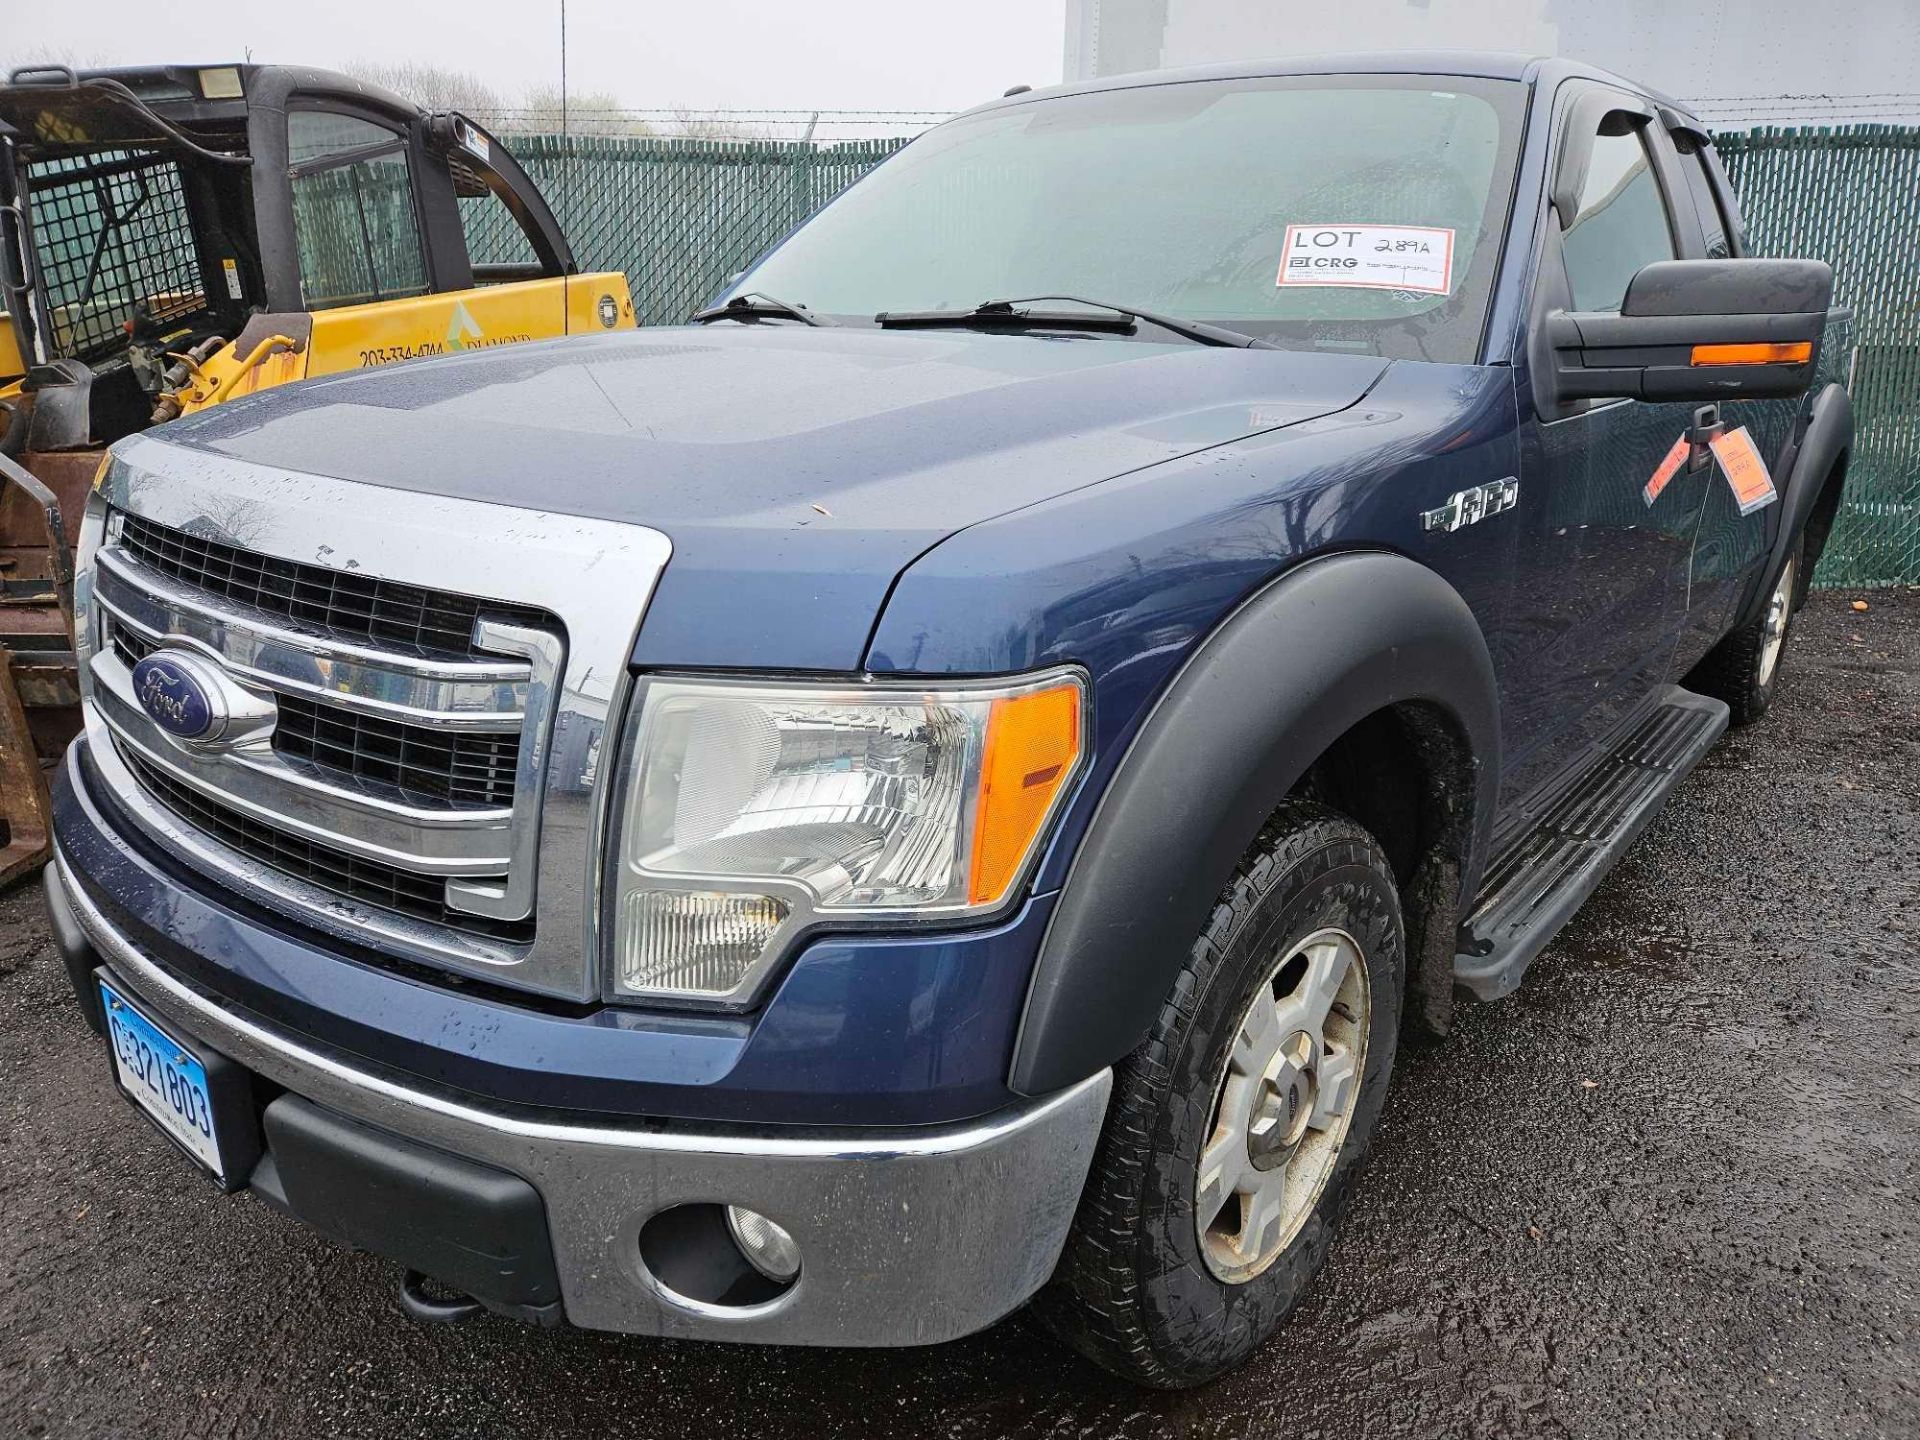 2014 Ford F150 Extended Cab Pickup